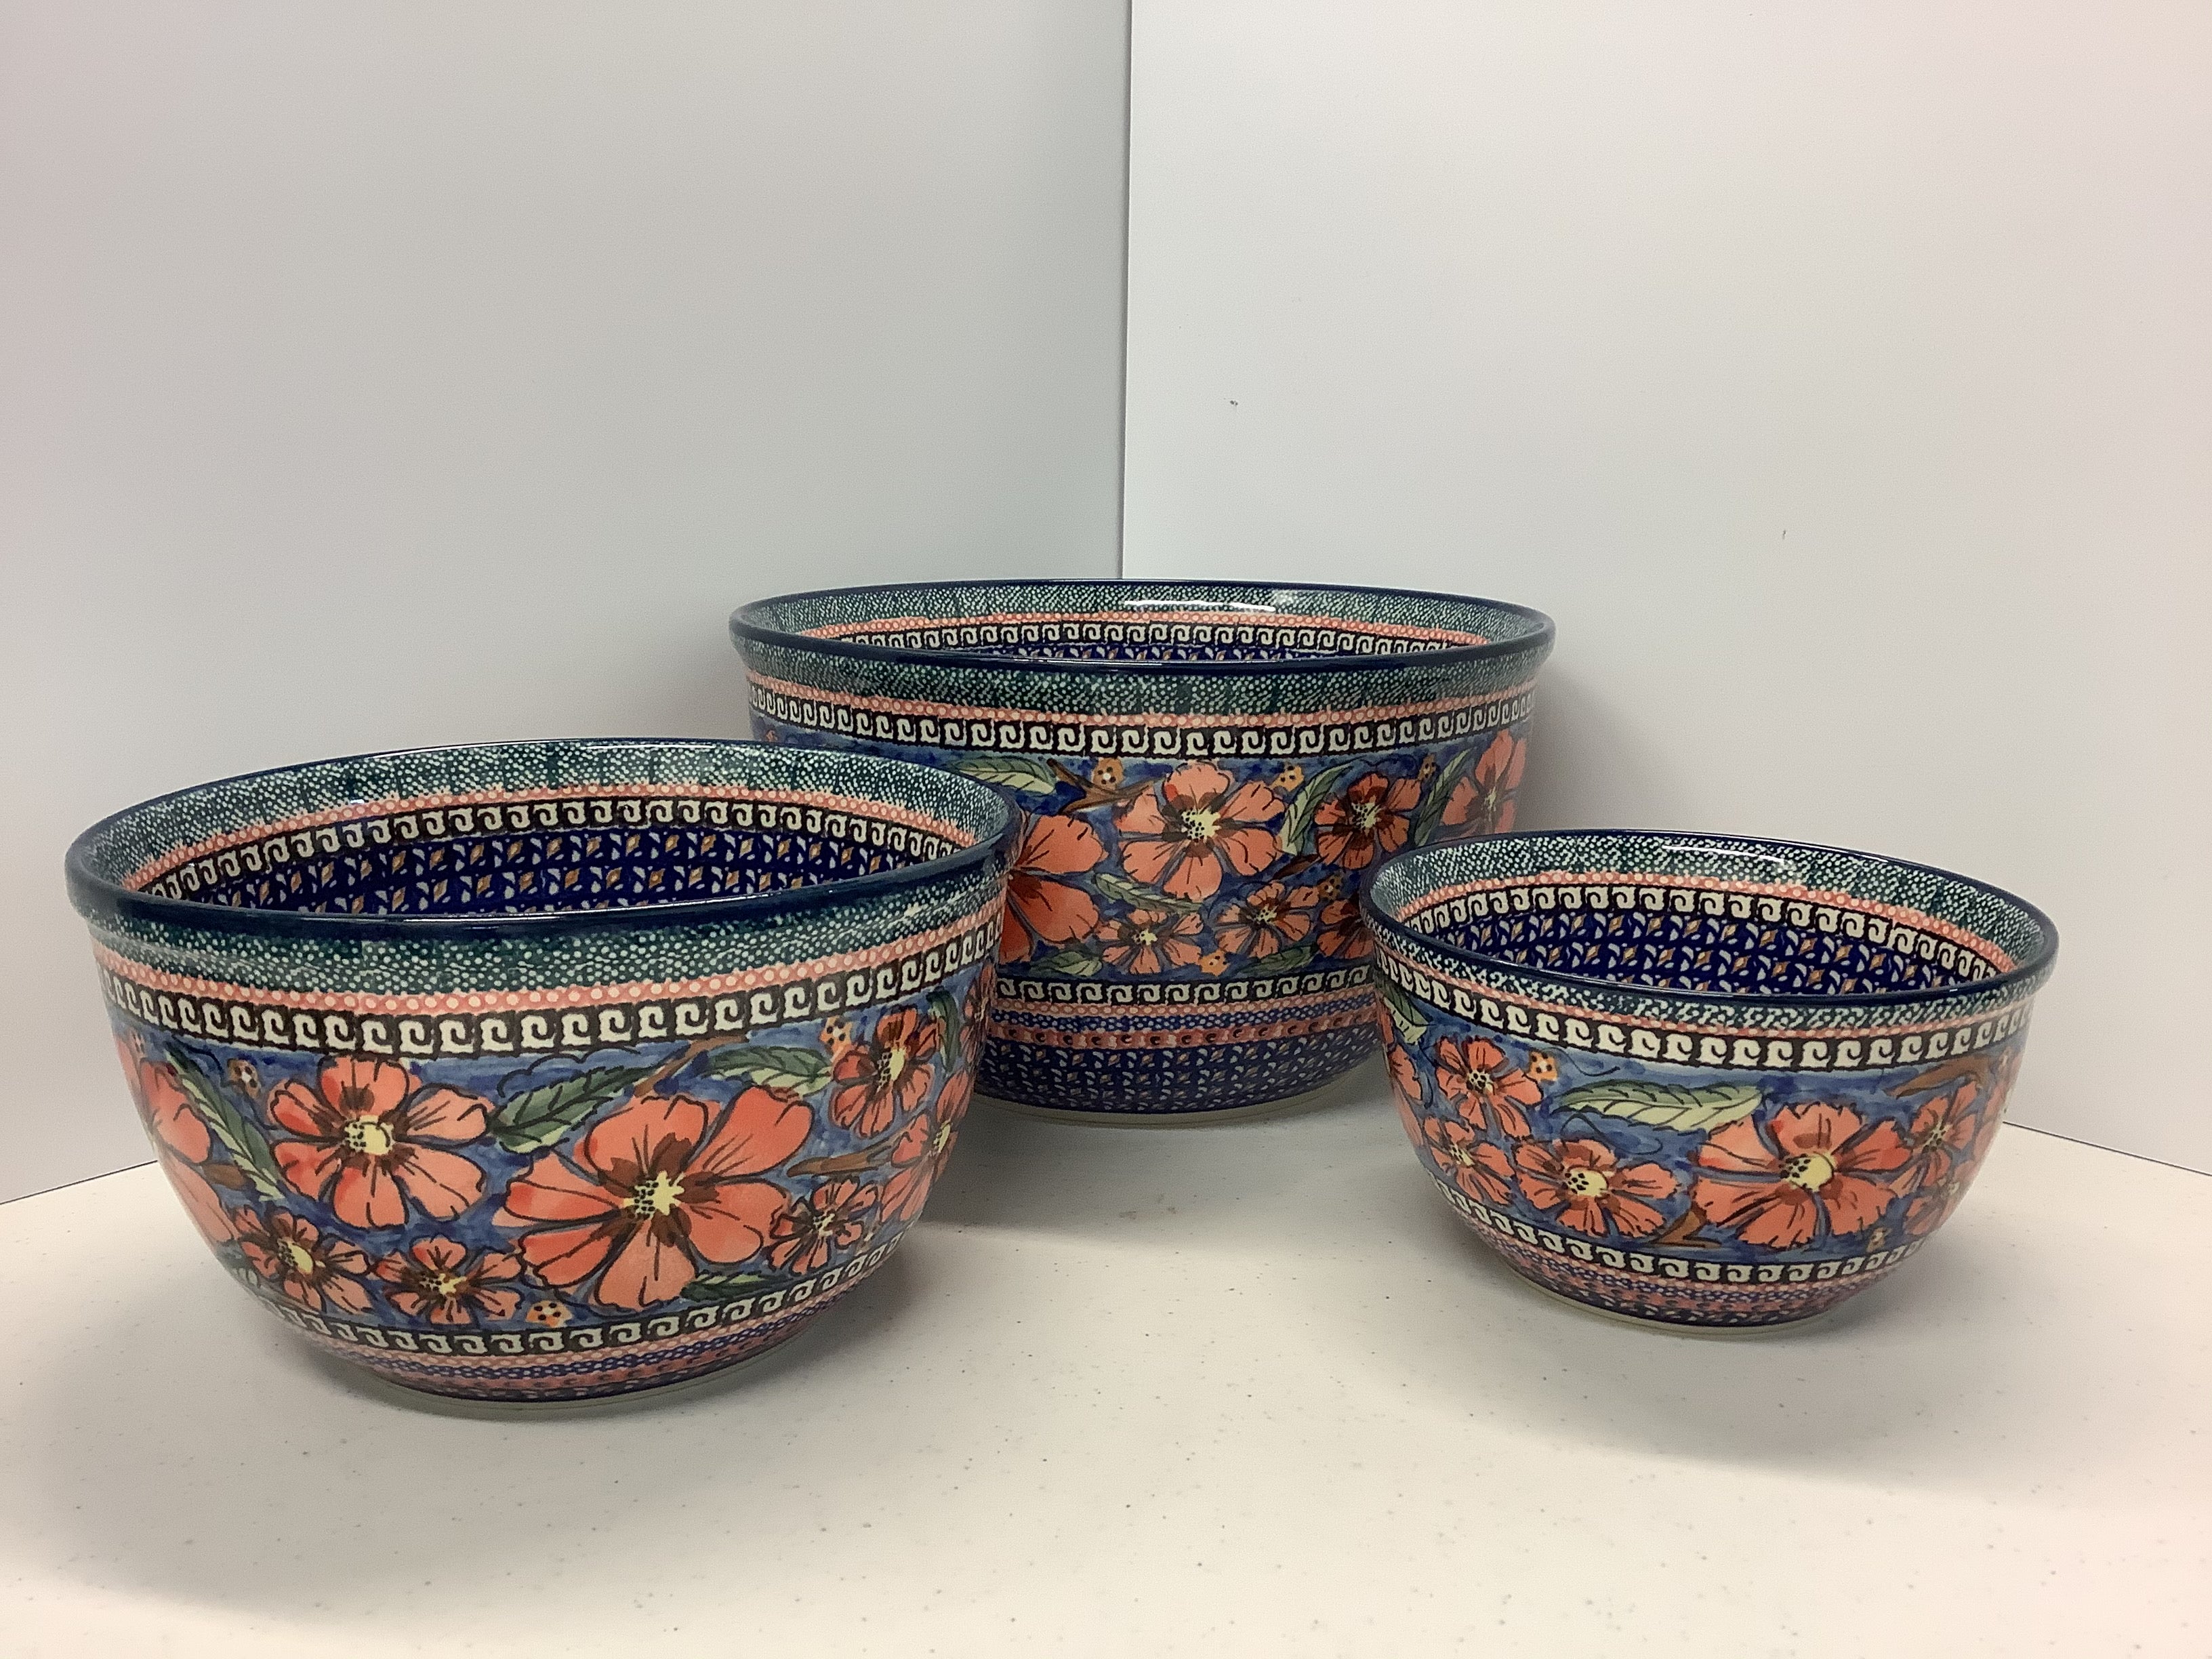 Small Mixing/Serving Bowl Hibiscus